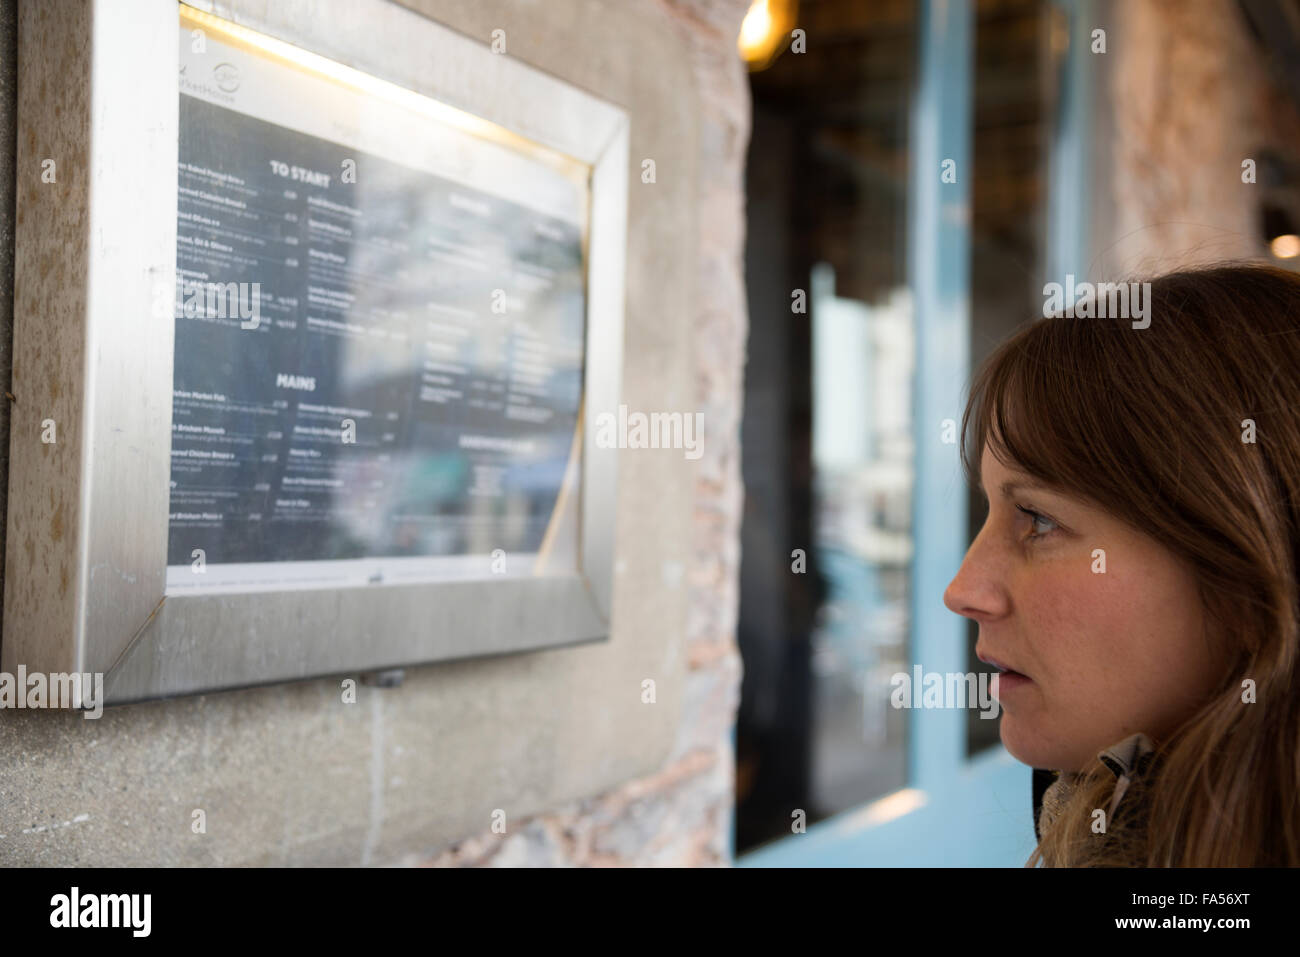 A woman looks at a restaurant menu with disgust Stock Photo